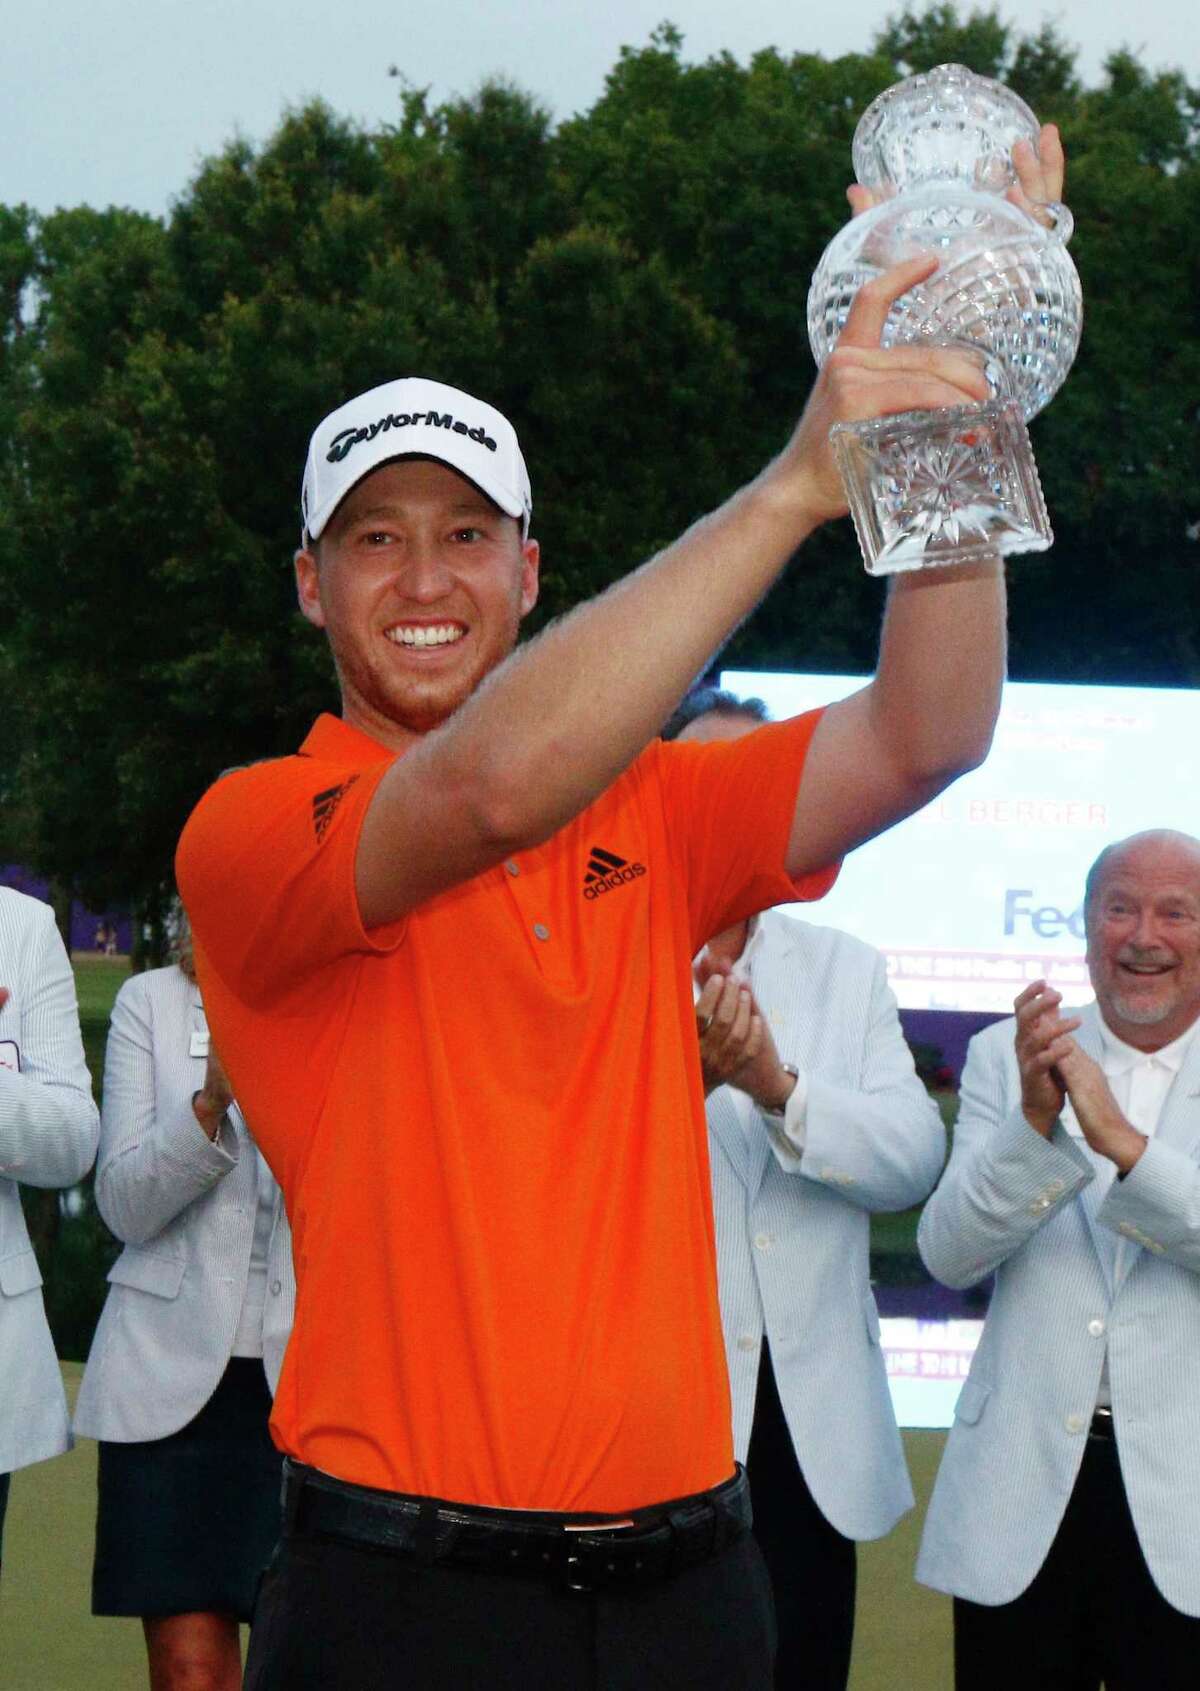 FILE - In this June 12, 2016, file photo, Daniel Berger celebrates winning the FedEx St. Jude Classic golf tournament, in Memphis, Tenn. Berger is back looking to defend his first and only PGA Tour title at the St. Jude Classic. (AP Photo/Rogelio V. Solis, FIle)